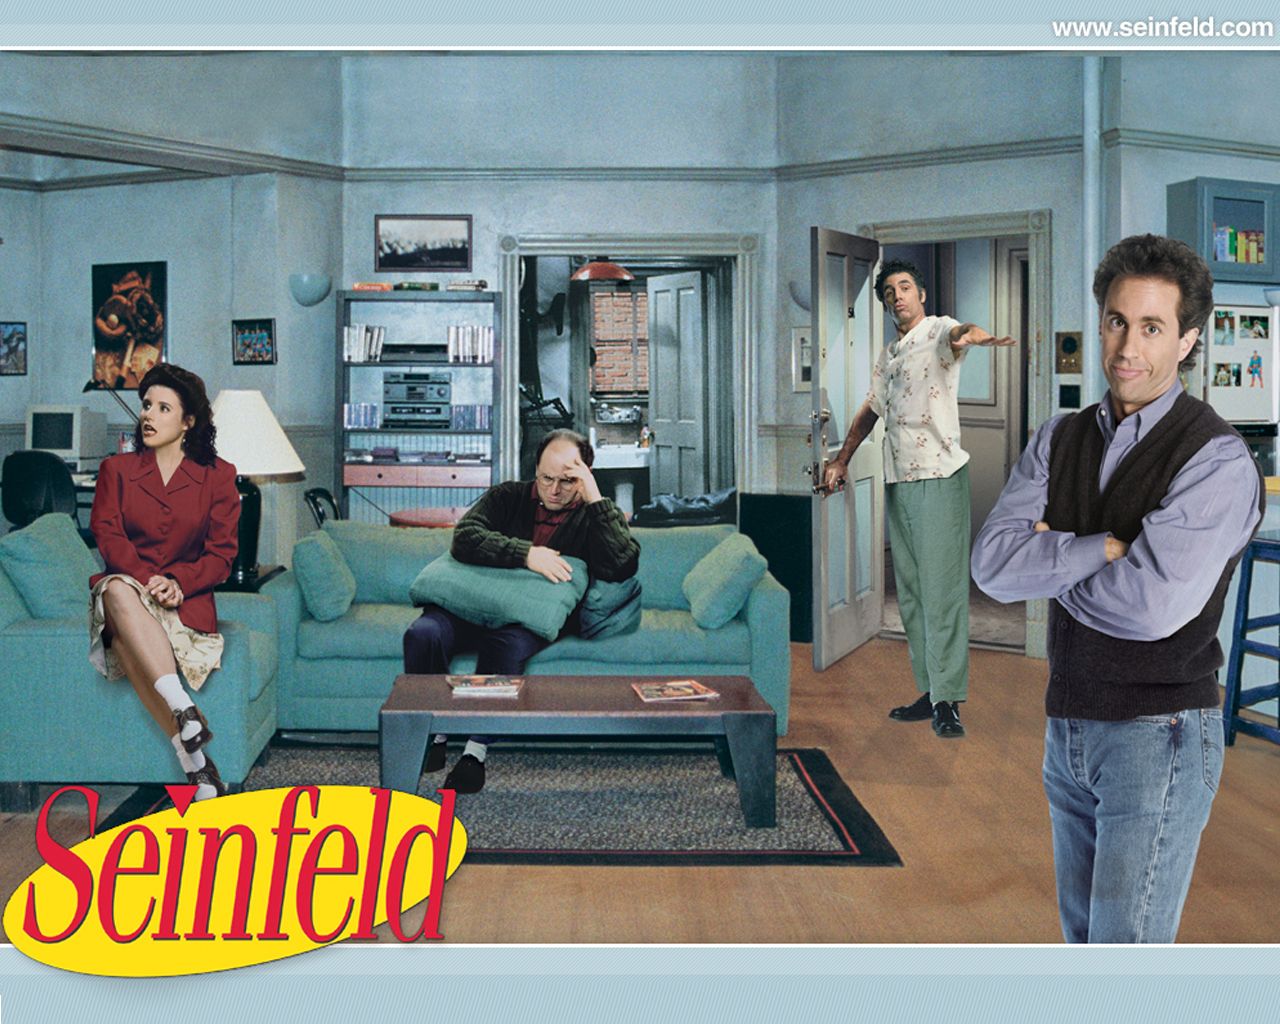 Movies: Seinfeld, picture nr. 35668